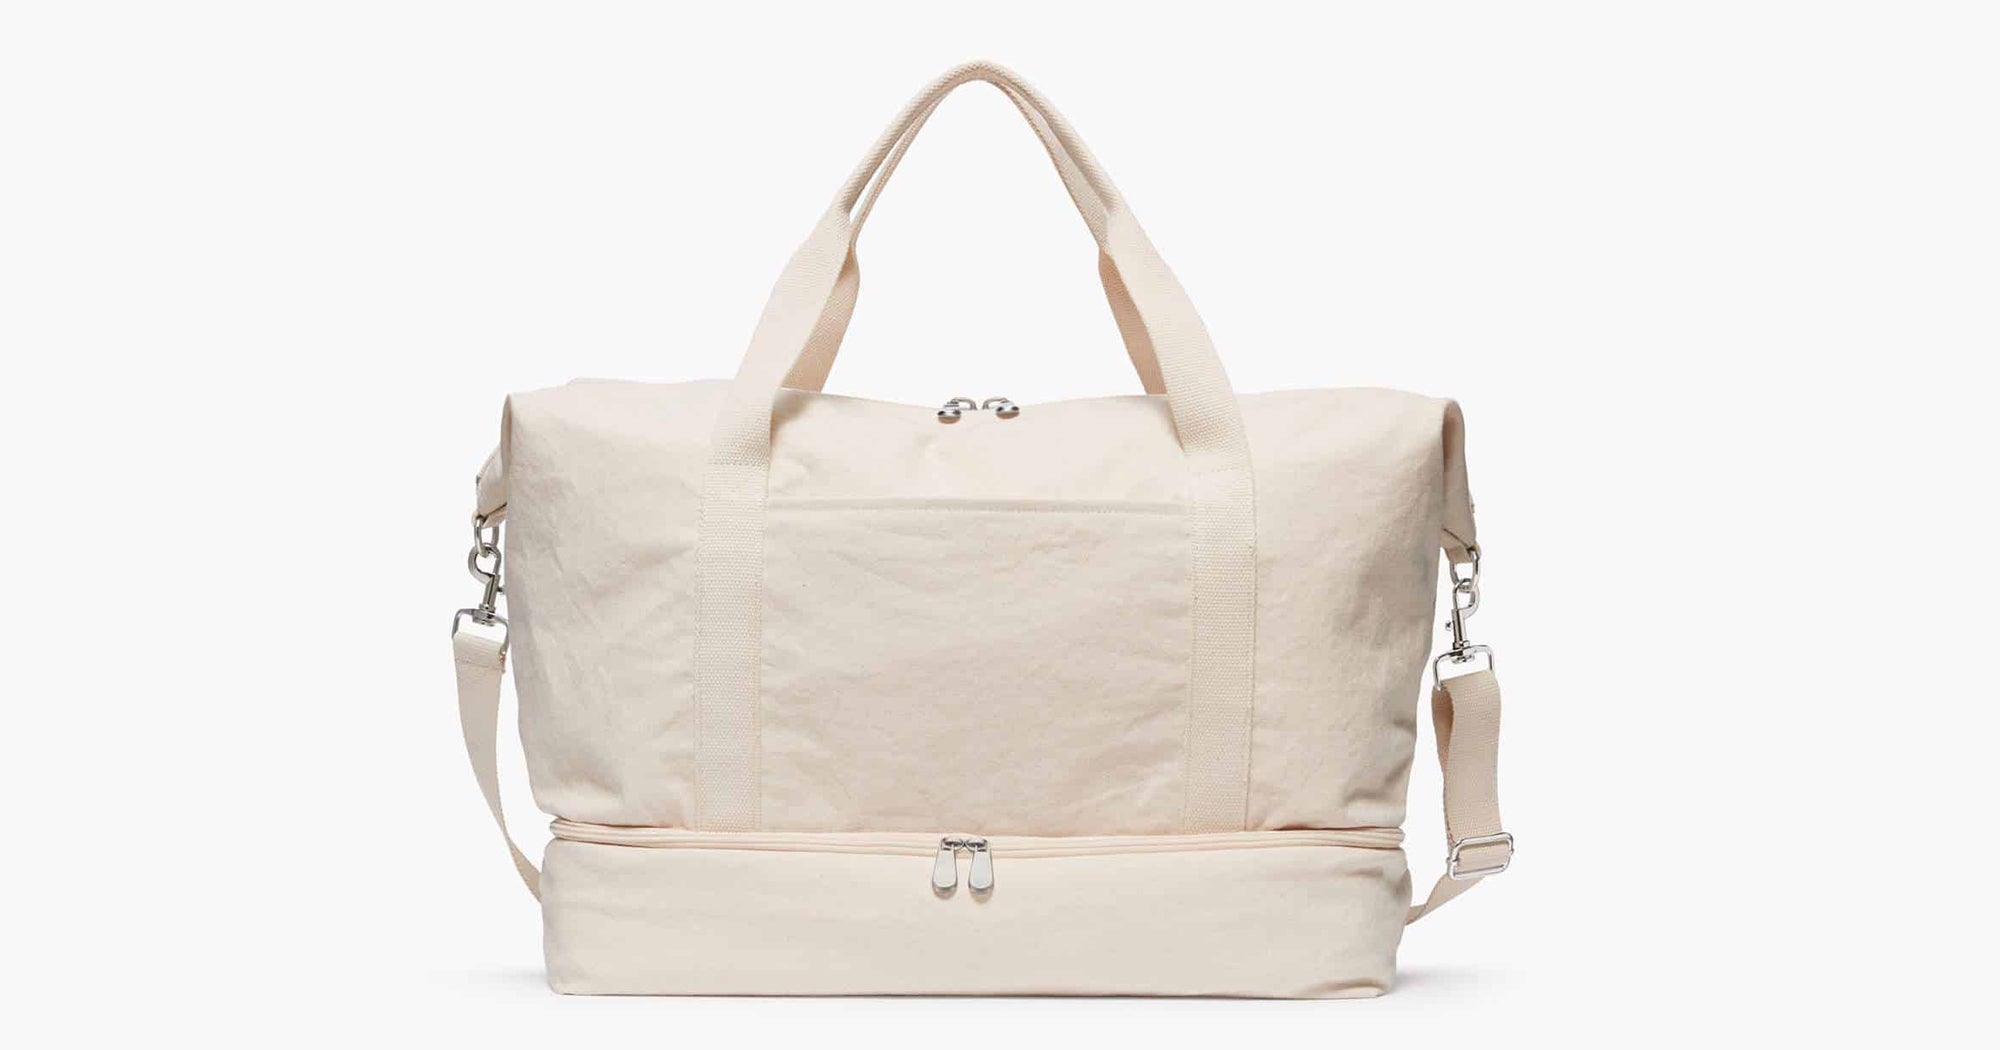 Lo & Sons Best-Selling Travel Bags Are 40% Off